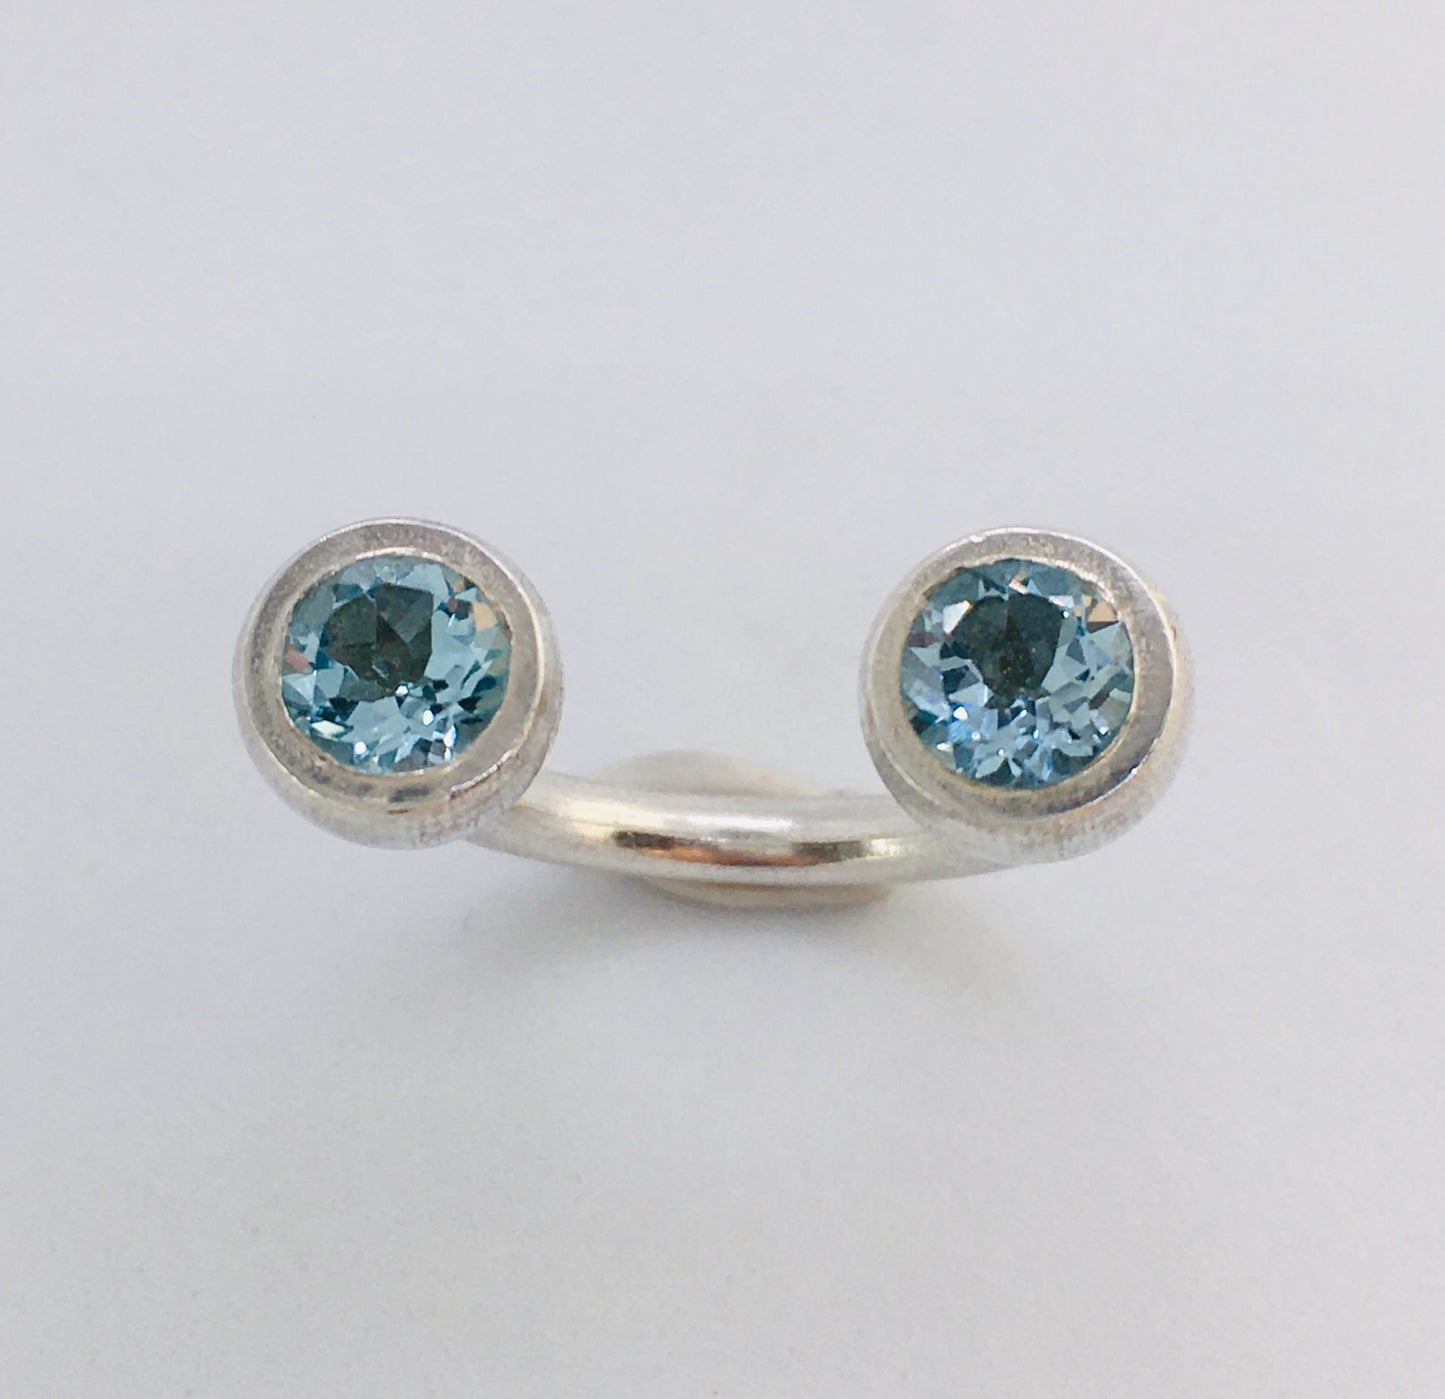 Crescent Stone Sterling Silver Ring with Blue Topaz